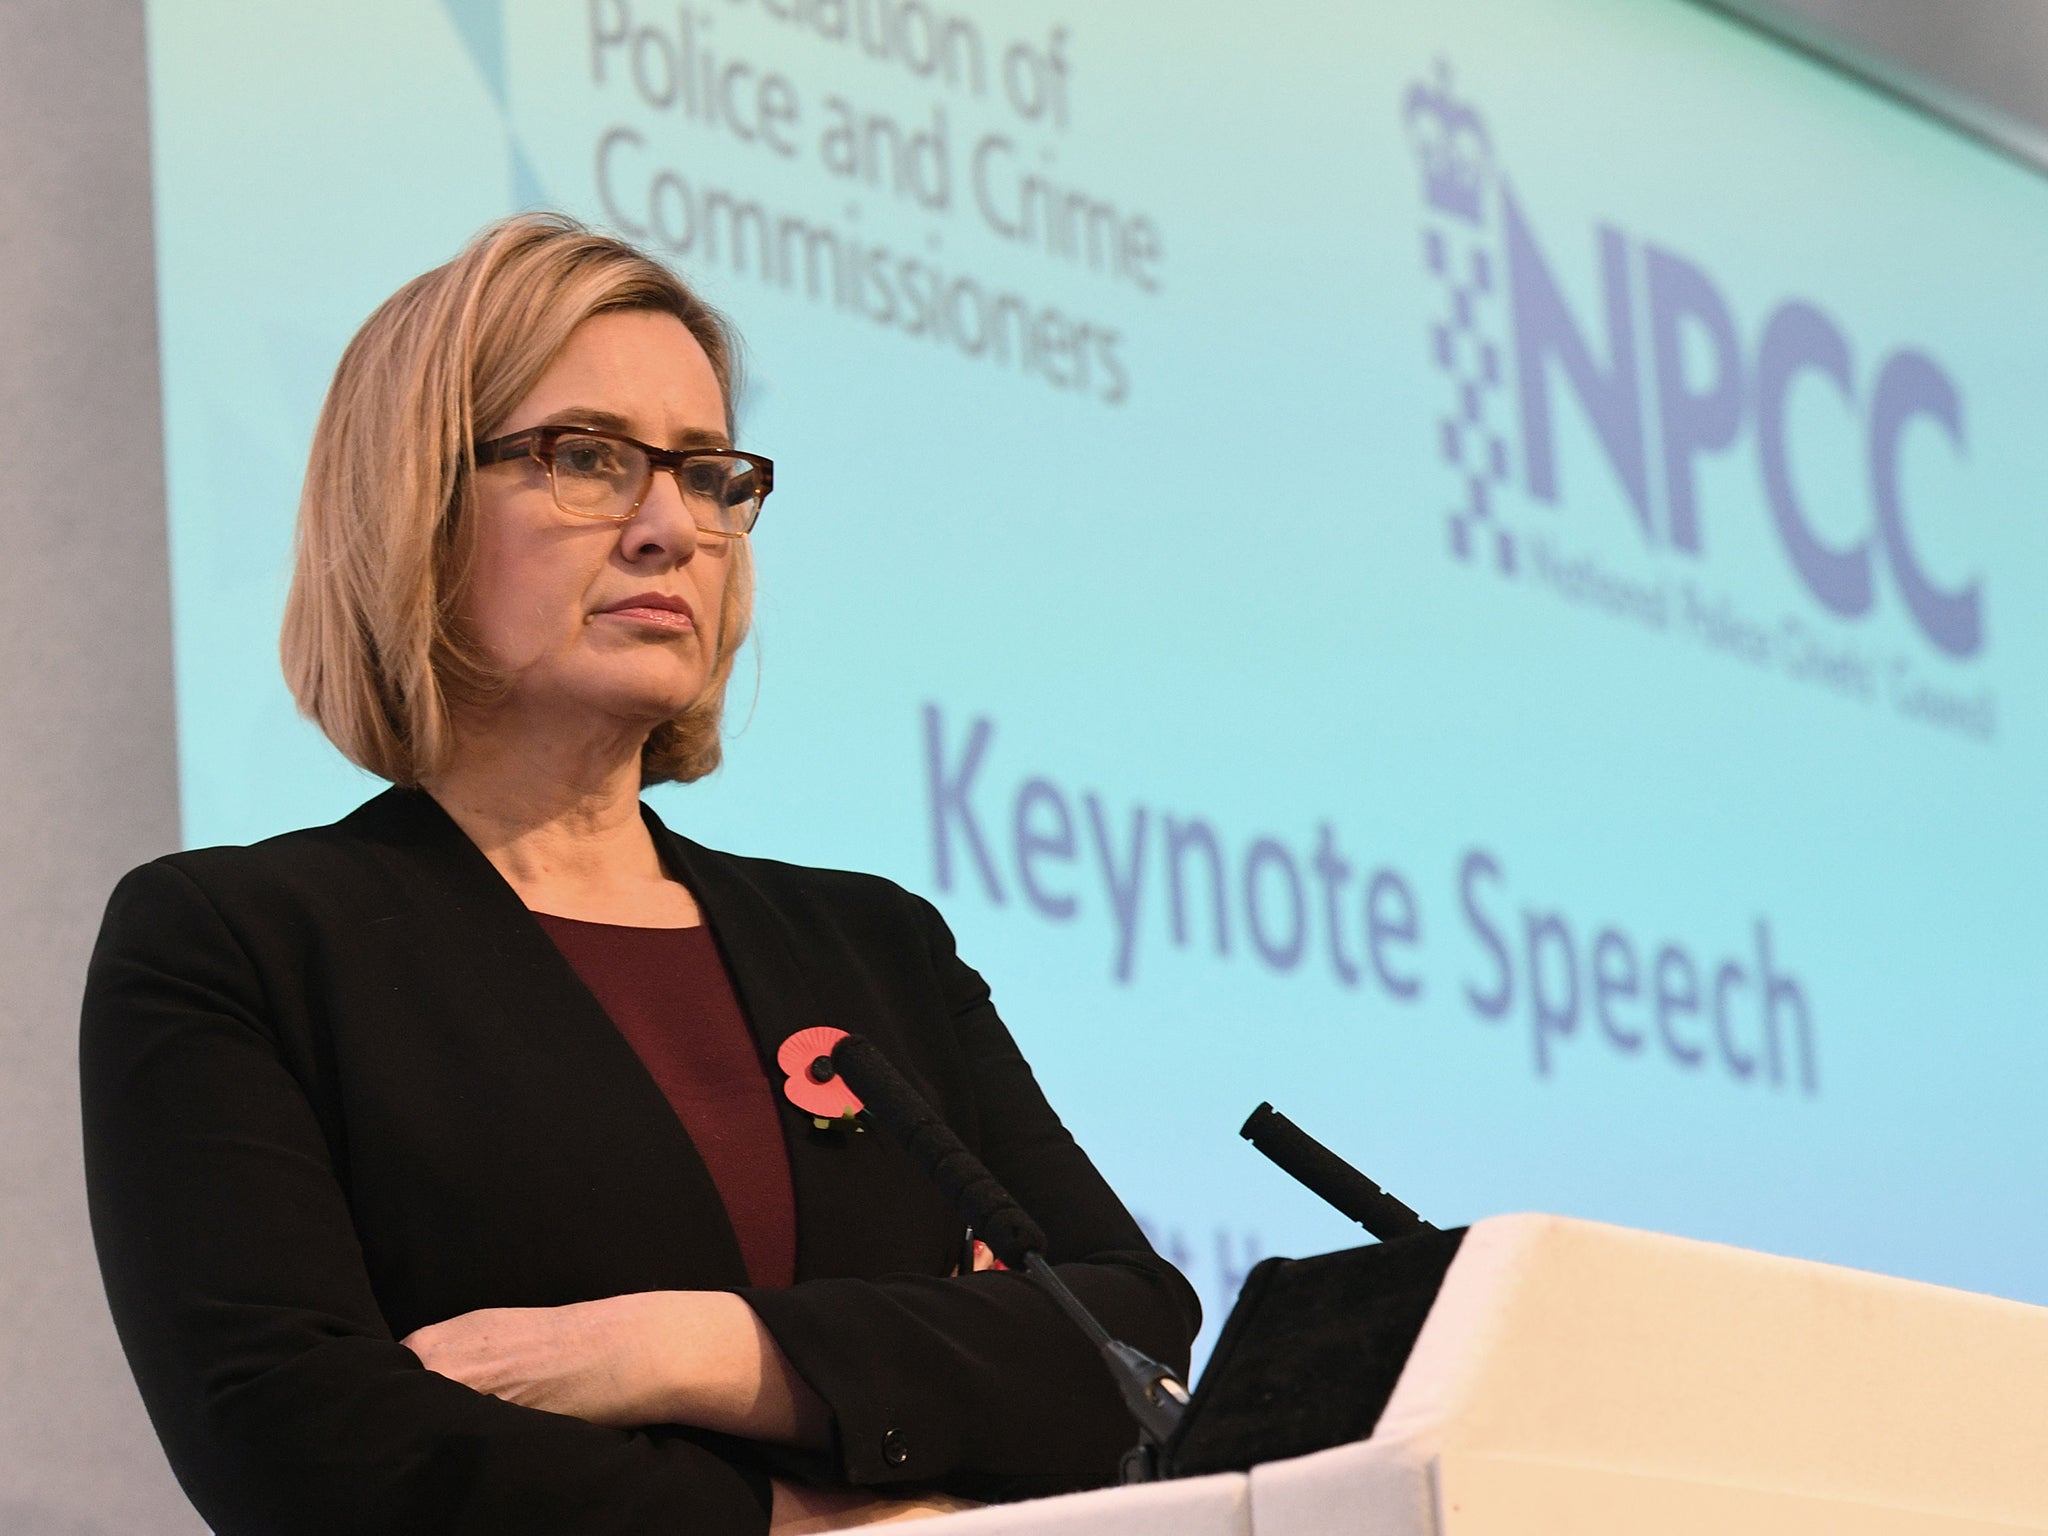 Home Secretary Amber Rudd told police not to ask for more money at a conference last month